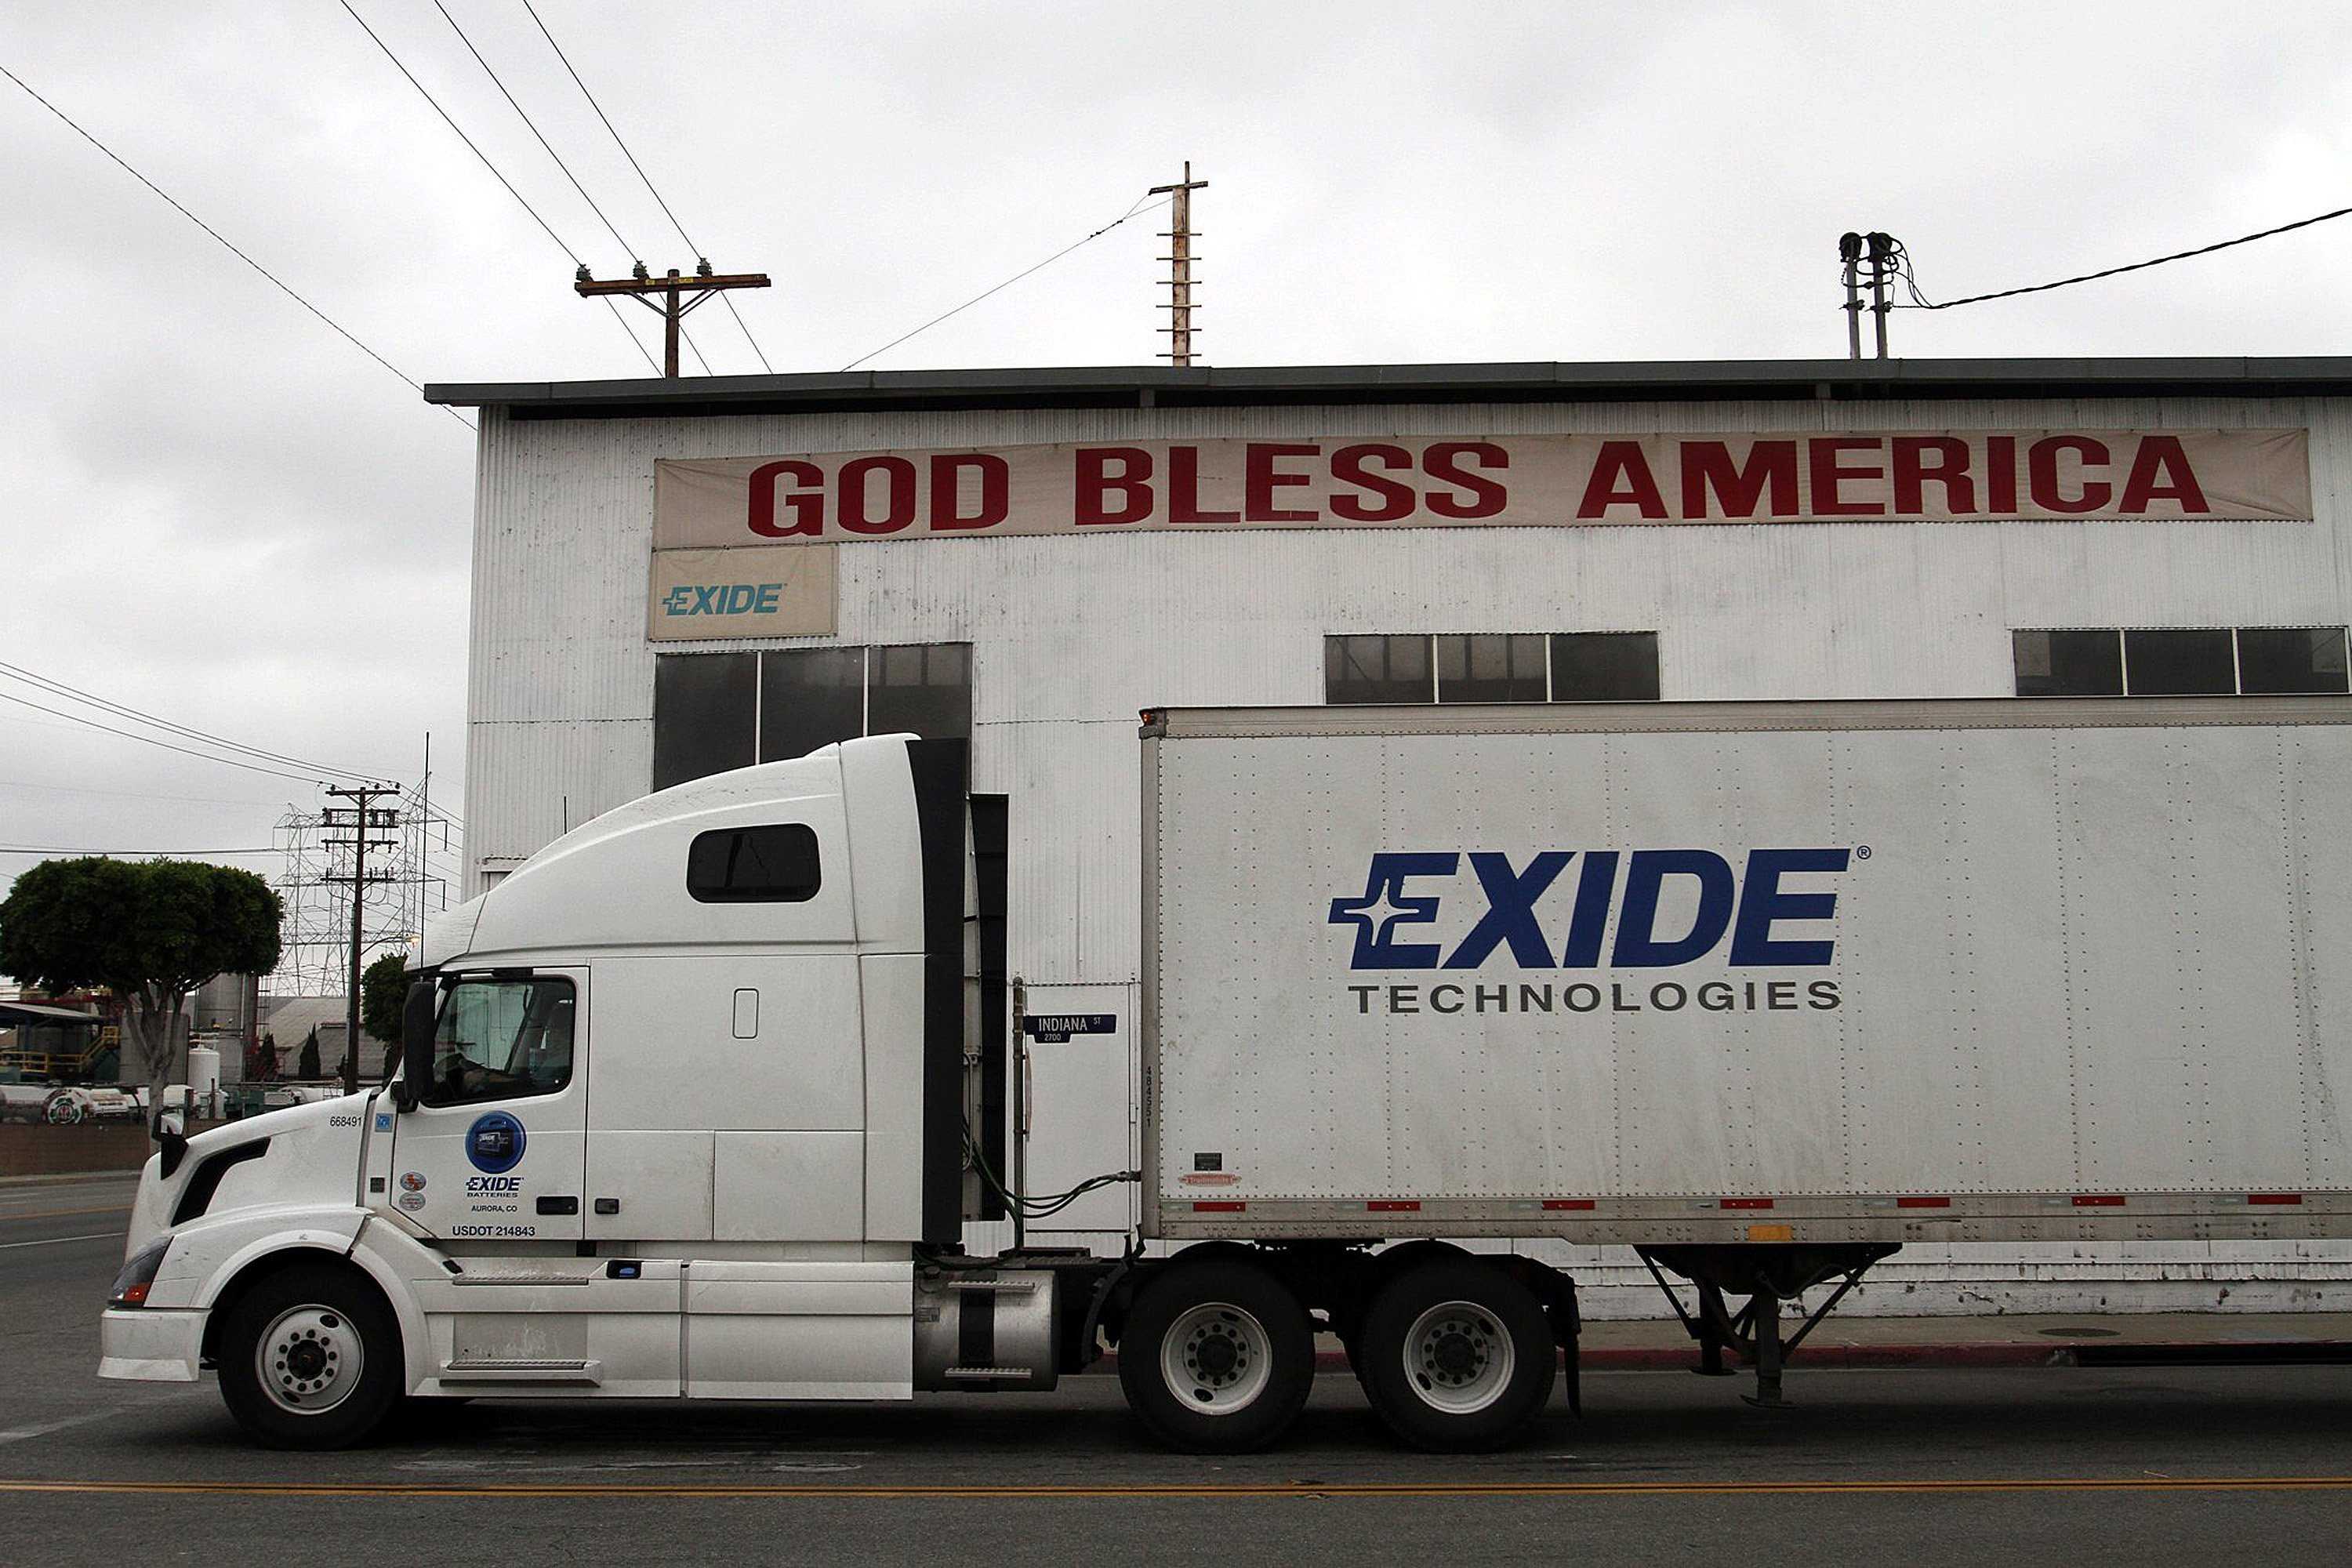 An+Exide+truck+waits+for+traffic+at+Indiana+Street+and+Bandini+under+patriotic+sign+at+lead+smelting+company+in+Vernon%2C+California%2C+April+24%2C+2013.+%28Bob+Chamberlin%2FLos+Angeles+Times%2FMCT%29